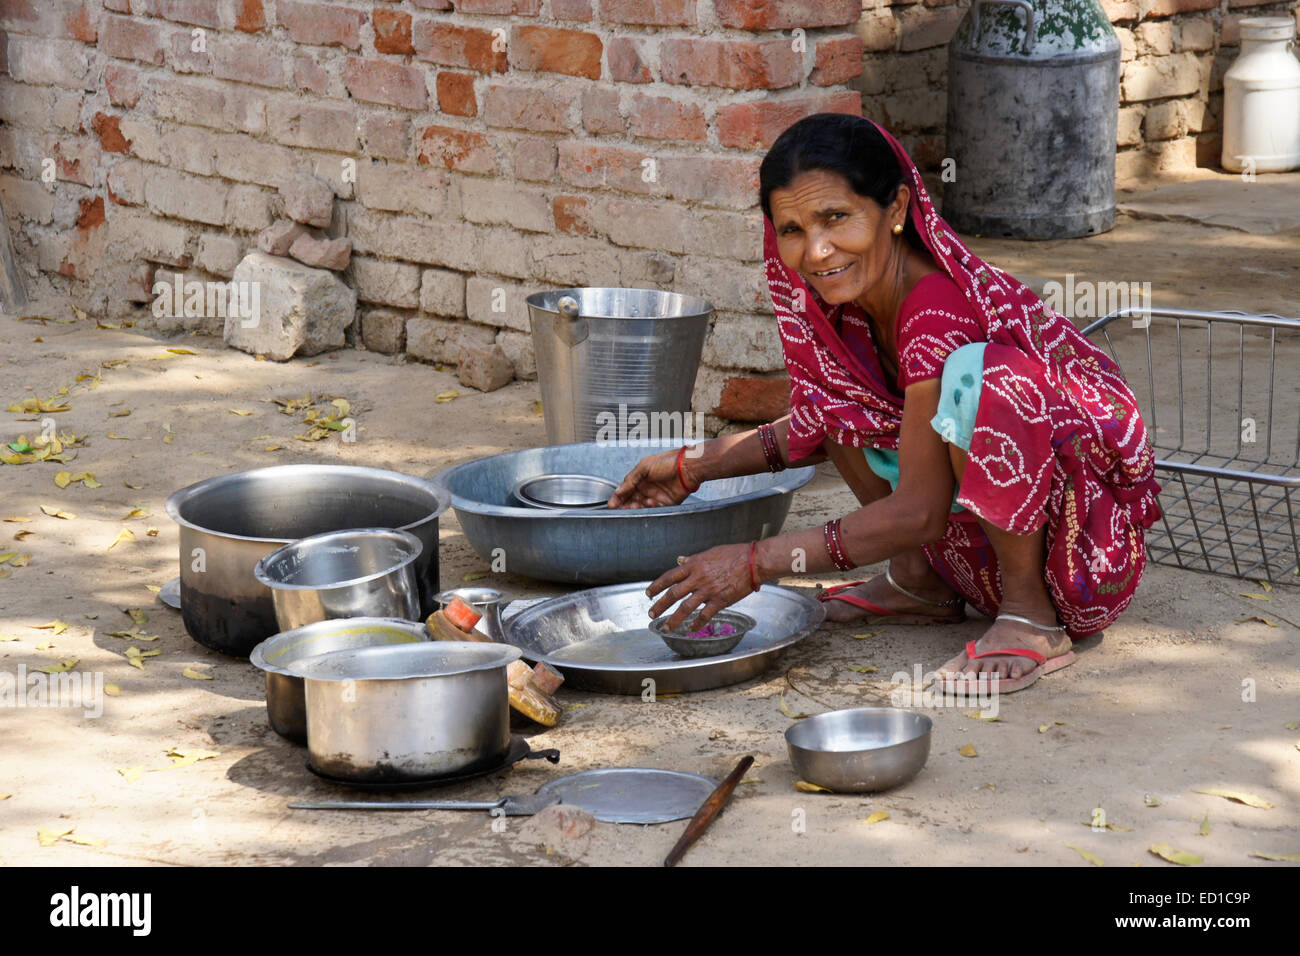 https://c8.alamy.com/comp/ED1C9P/woman-in-traditional-dress-cleaning-pots-outside-her-home-modhera-ED1C9P.jpg